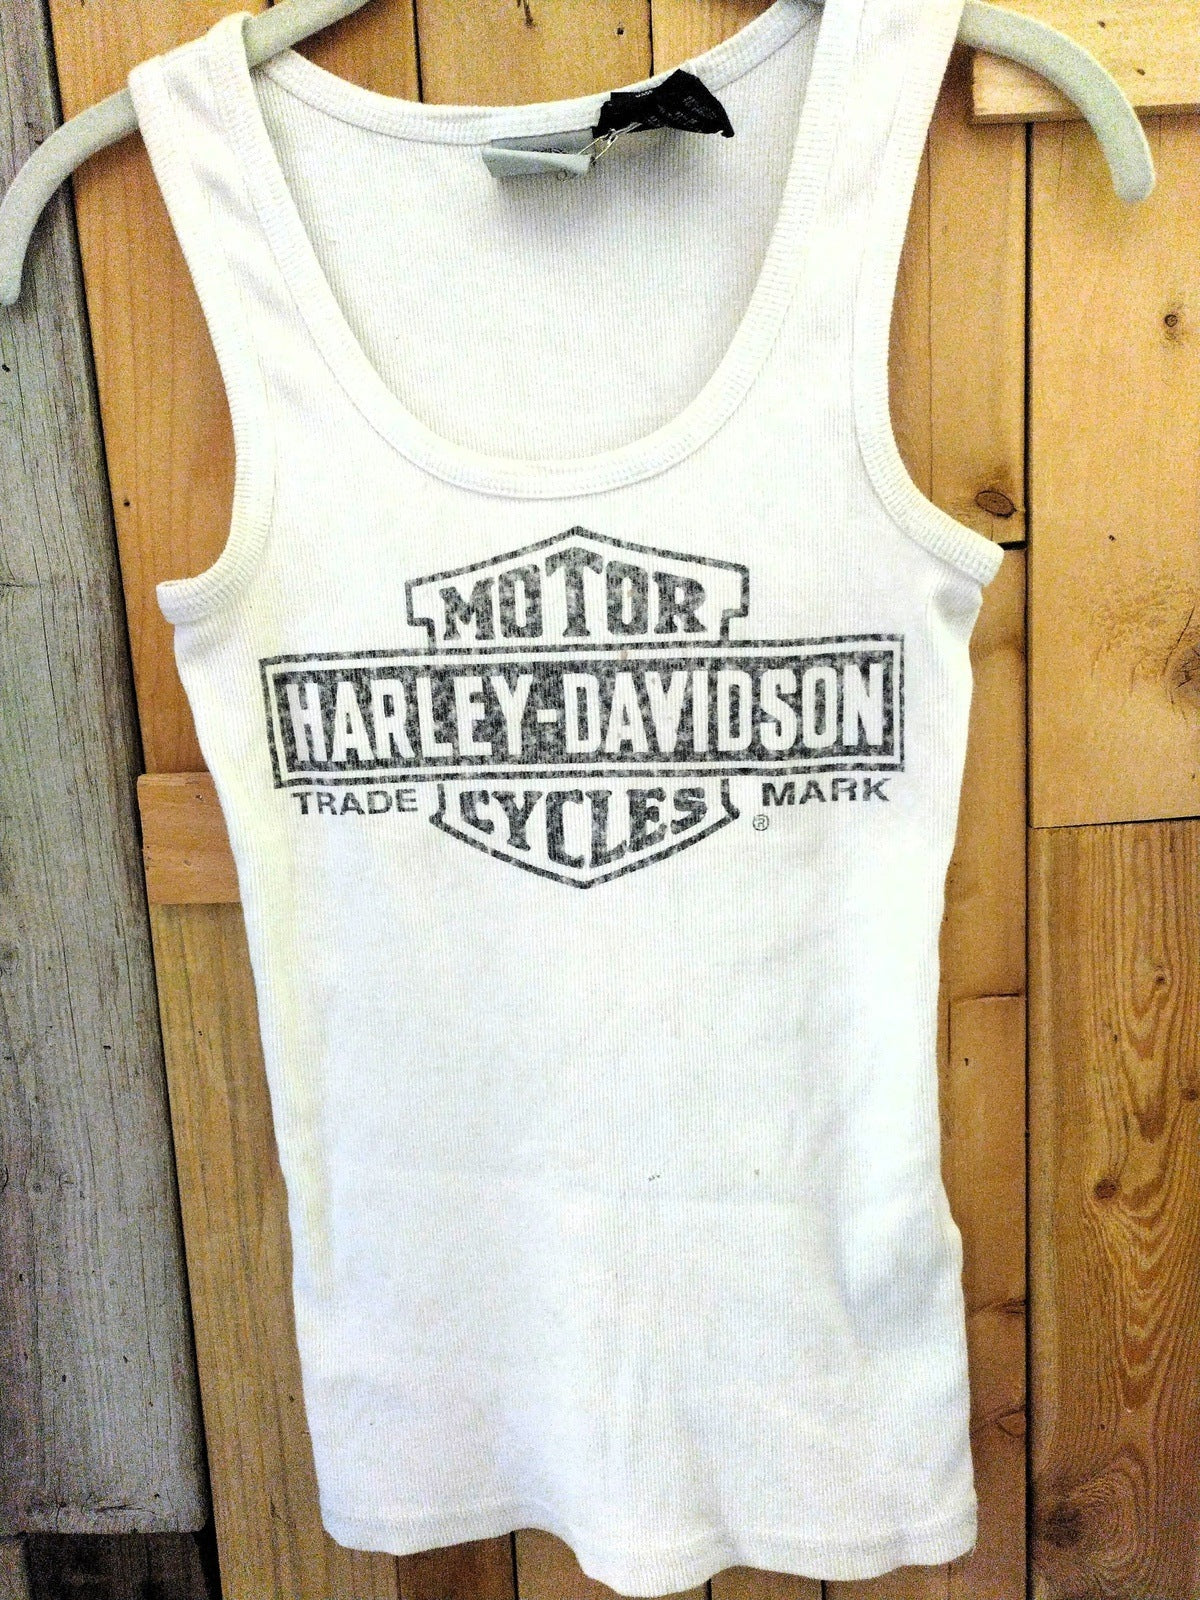 Harley Davidson Official Merchandise Men's Size Small Tank Top